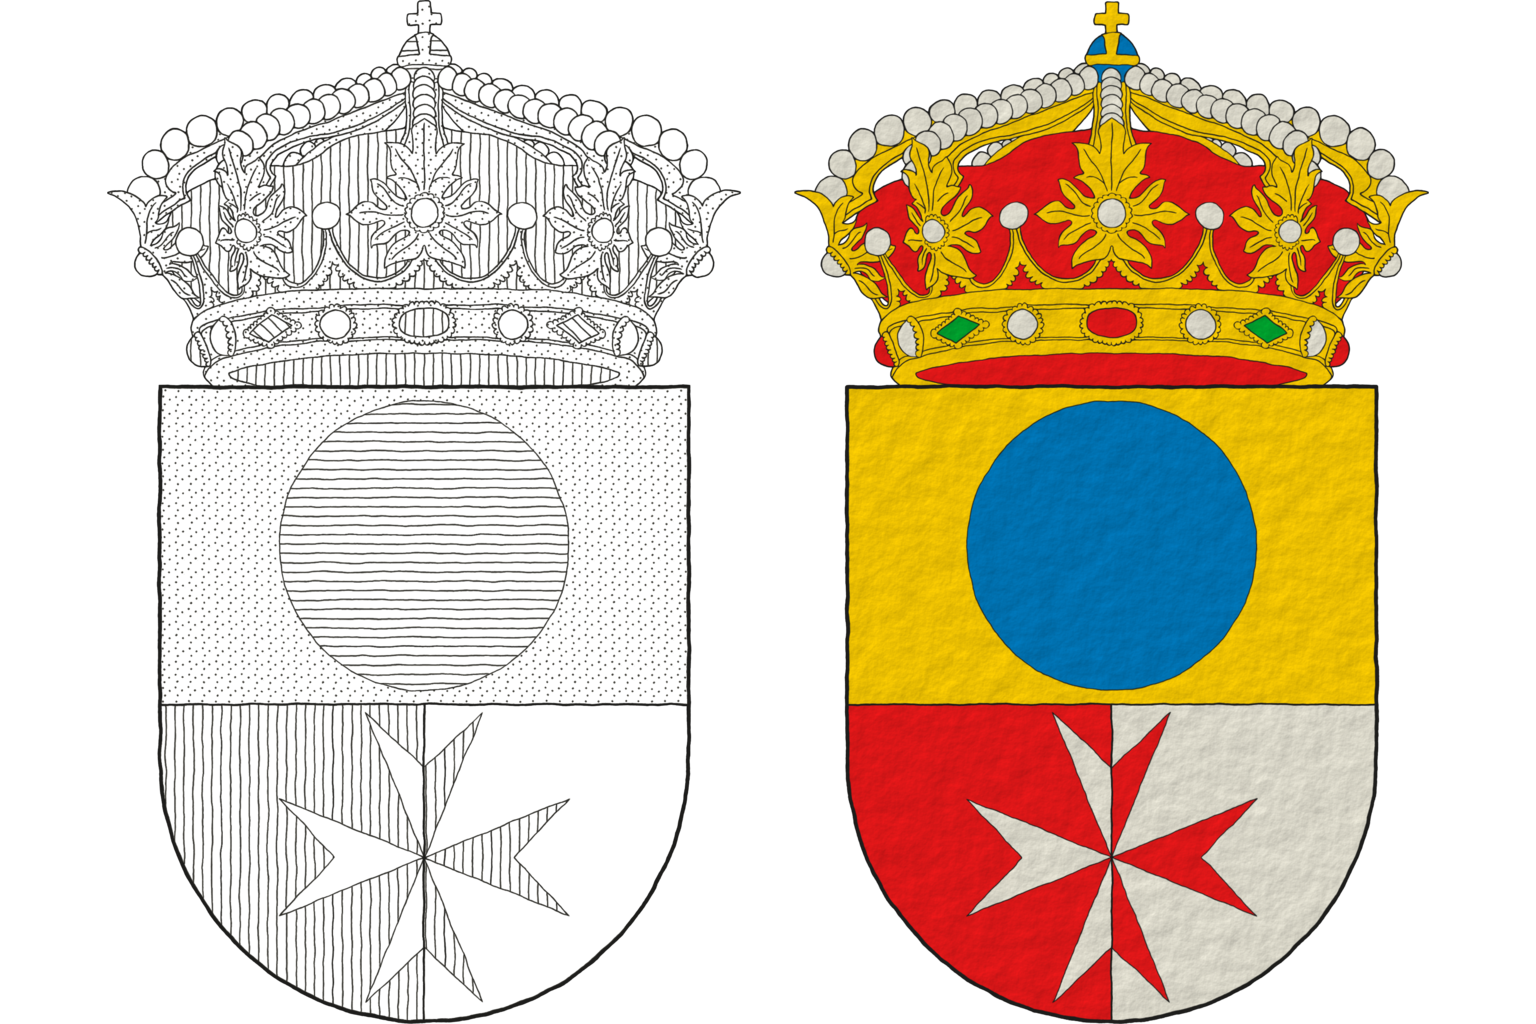 Party per fess, the base per pale: 1 Or, a hurt; 2 Gules and 3 Argent, over both a cross of Malta counterchanged. Crest: A closed royal crown.